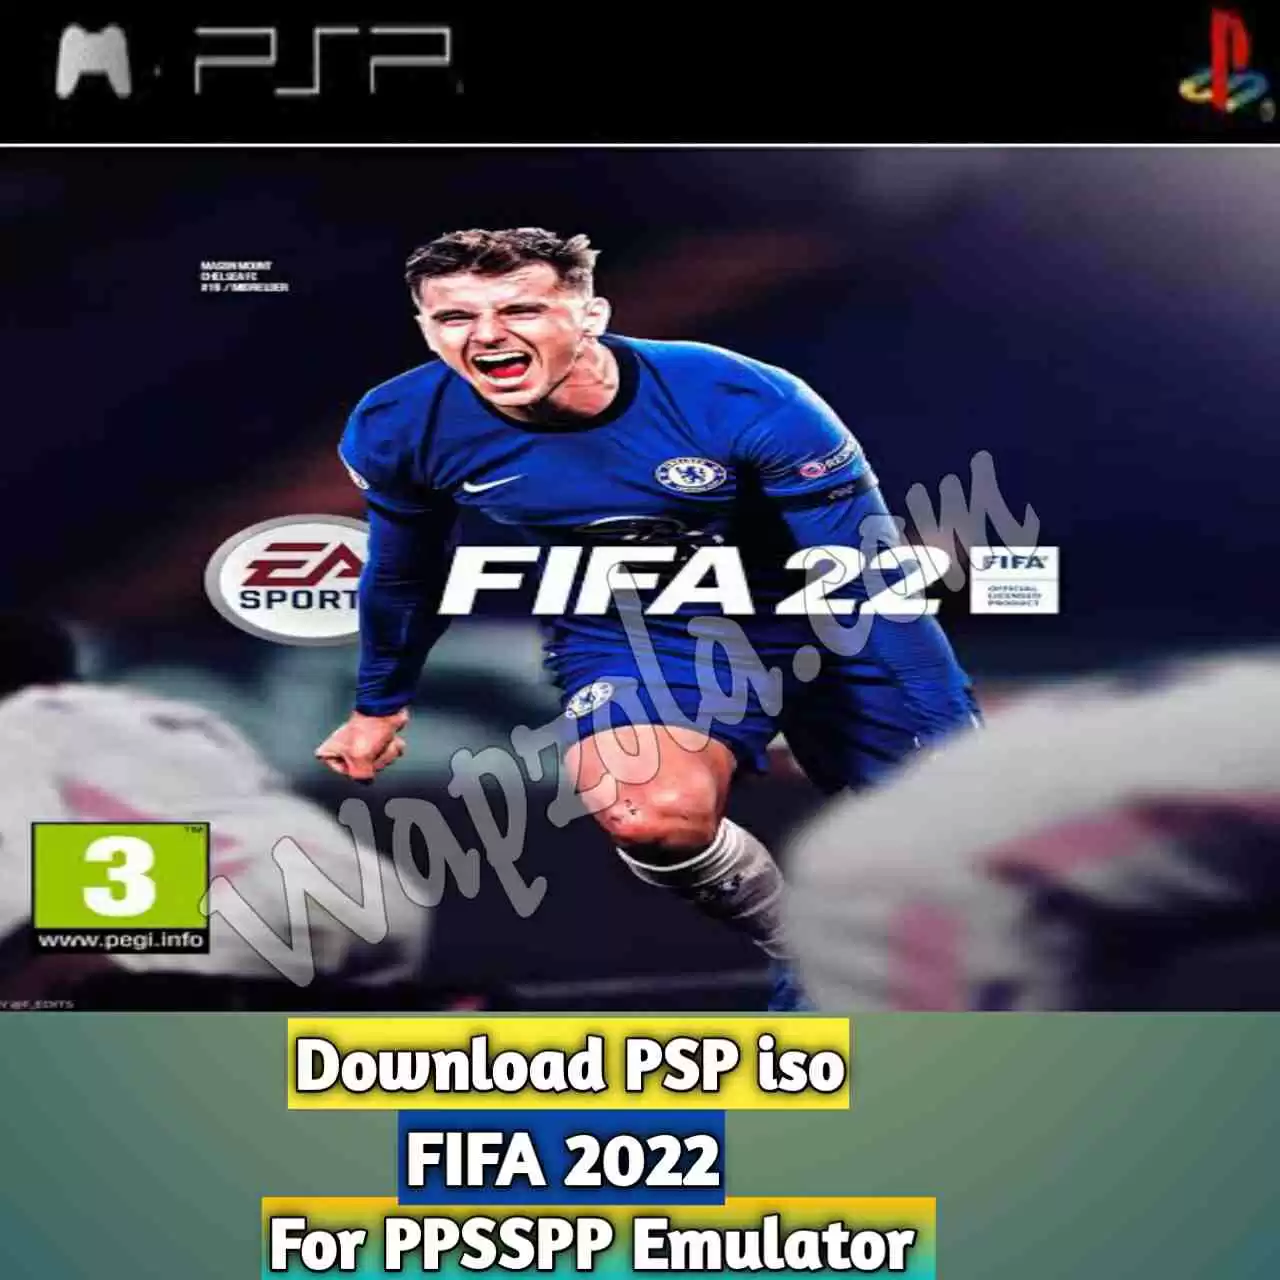 FIFA 21 PPSSPP Download Highly Compressed With PS5 Camera